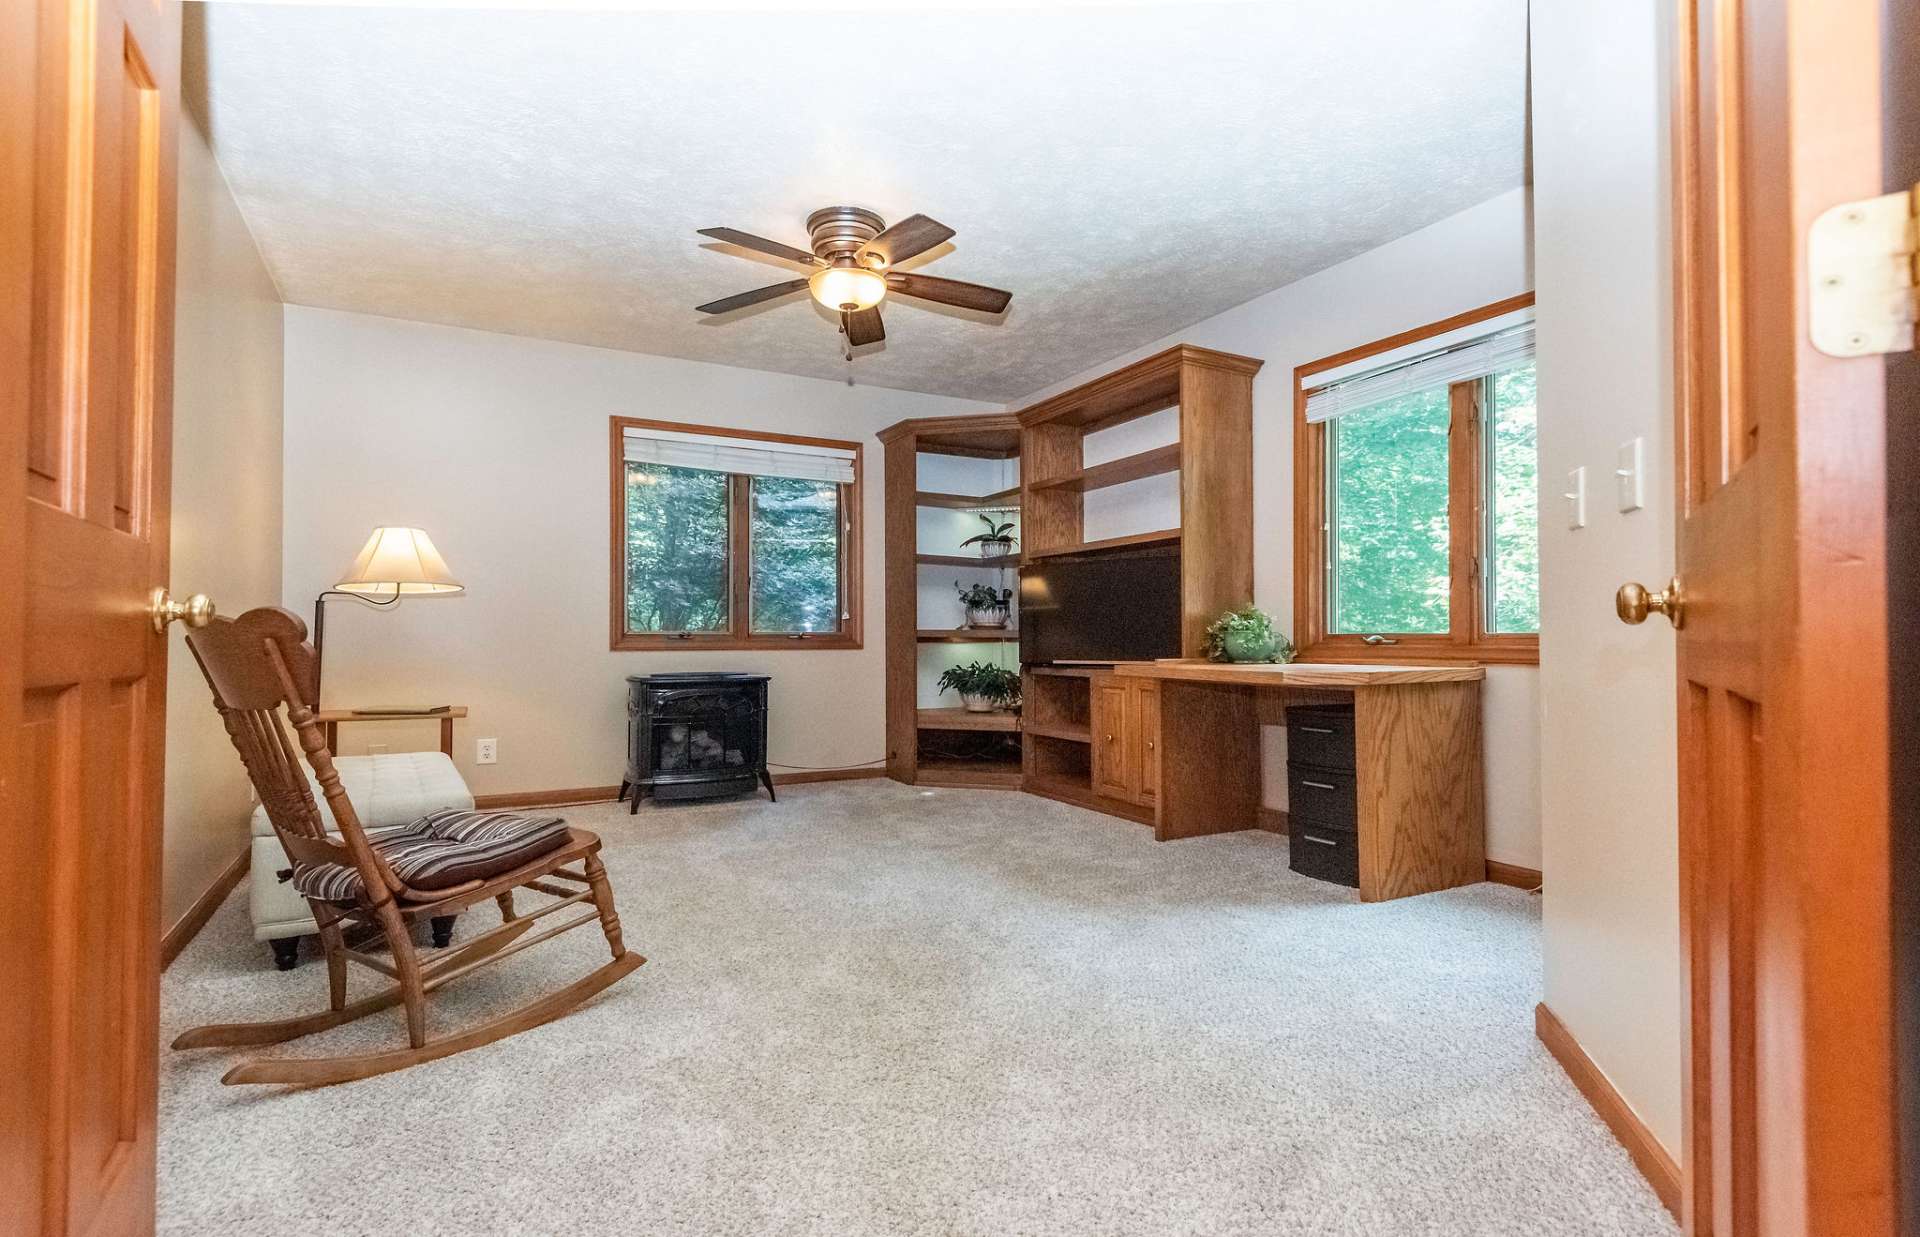 This room on main level could serve as an office, den, or bedroom. Previously used as a bedroom, and current owner's used as a den. Windows were added where the desk is located at the same time as french door and deck in master suite.